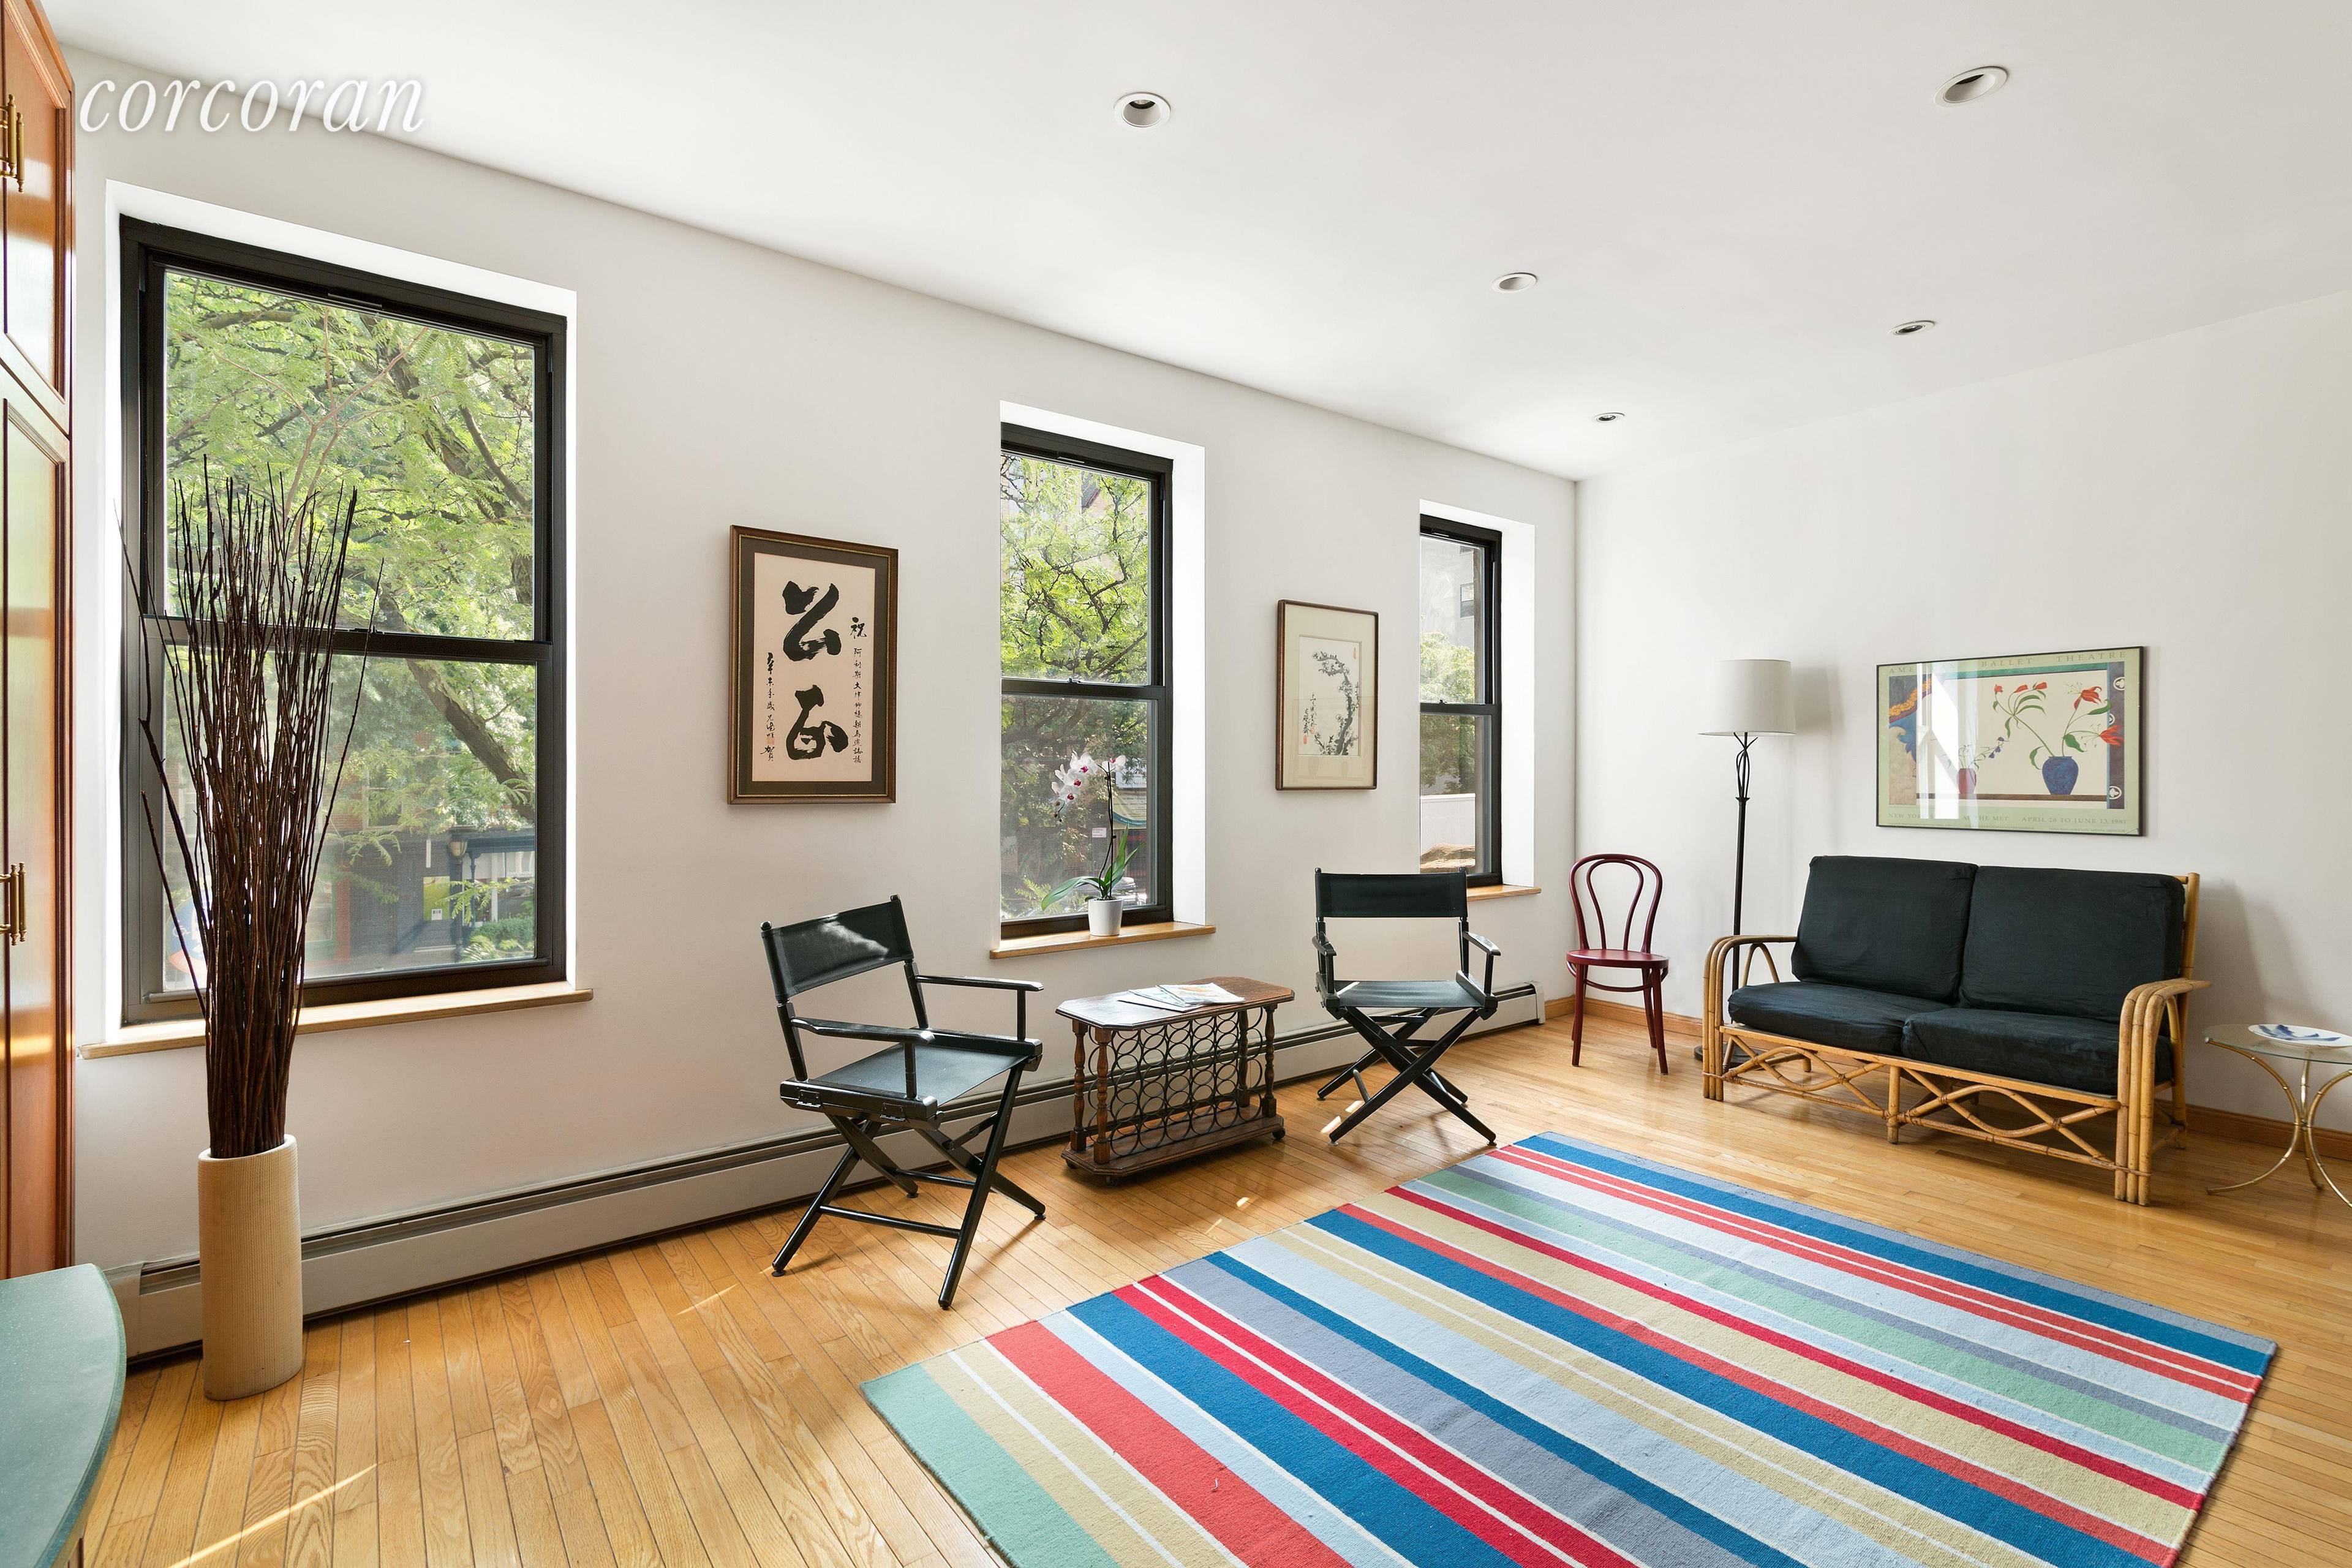 East meets West in a beautifully renovated Atlantic Avenue townhouse.